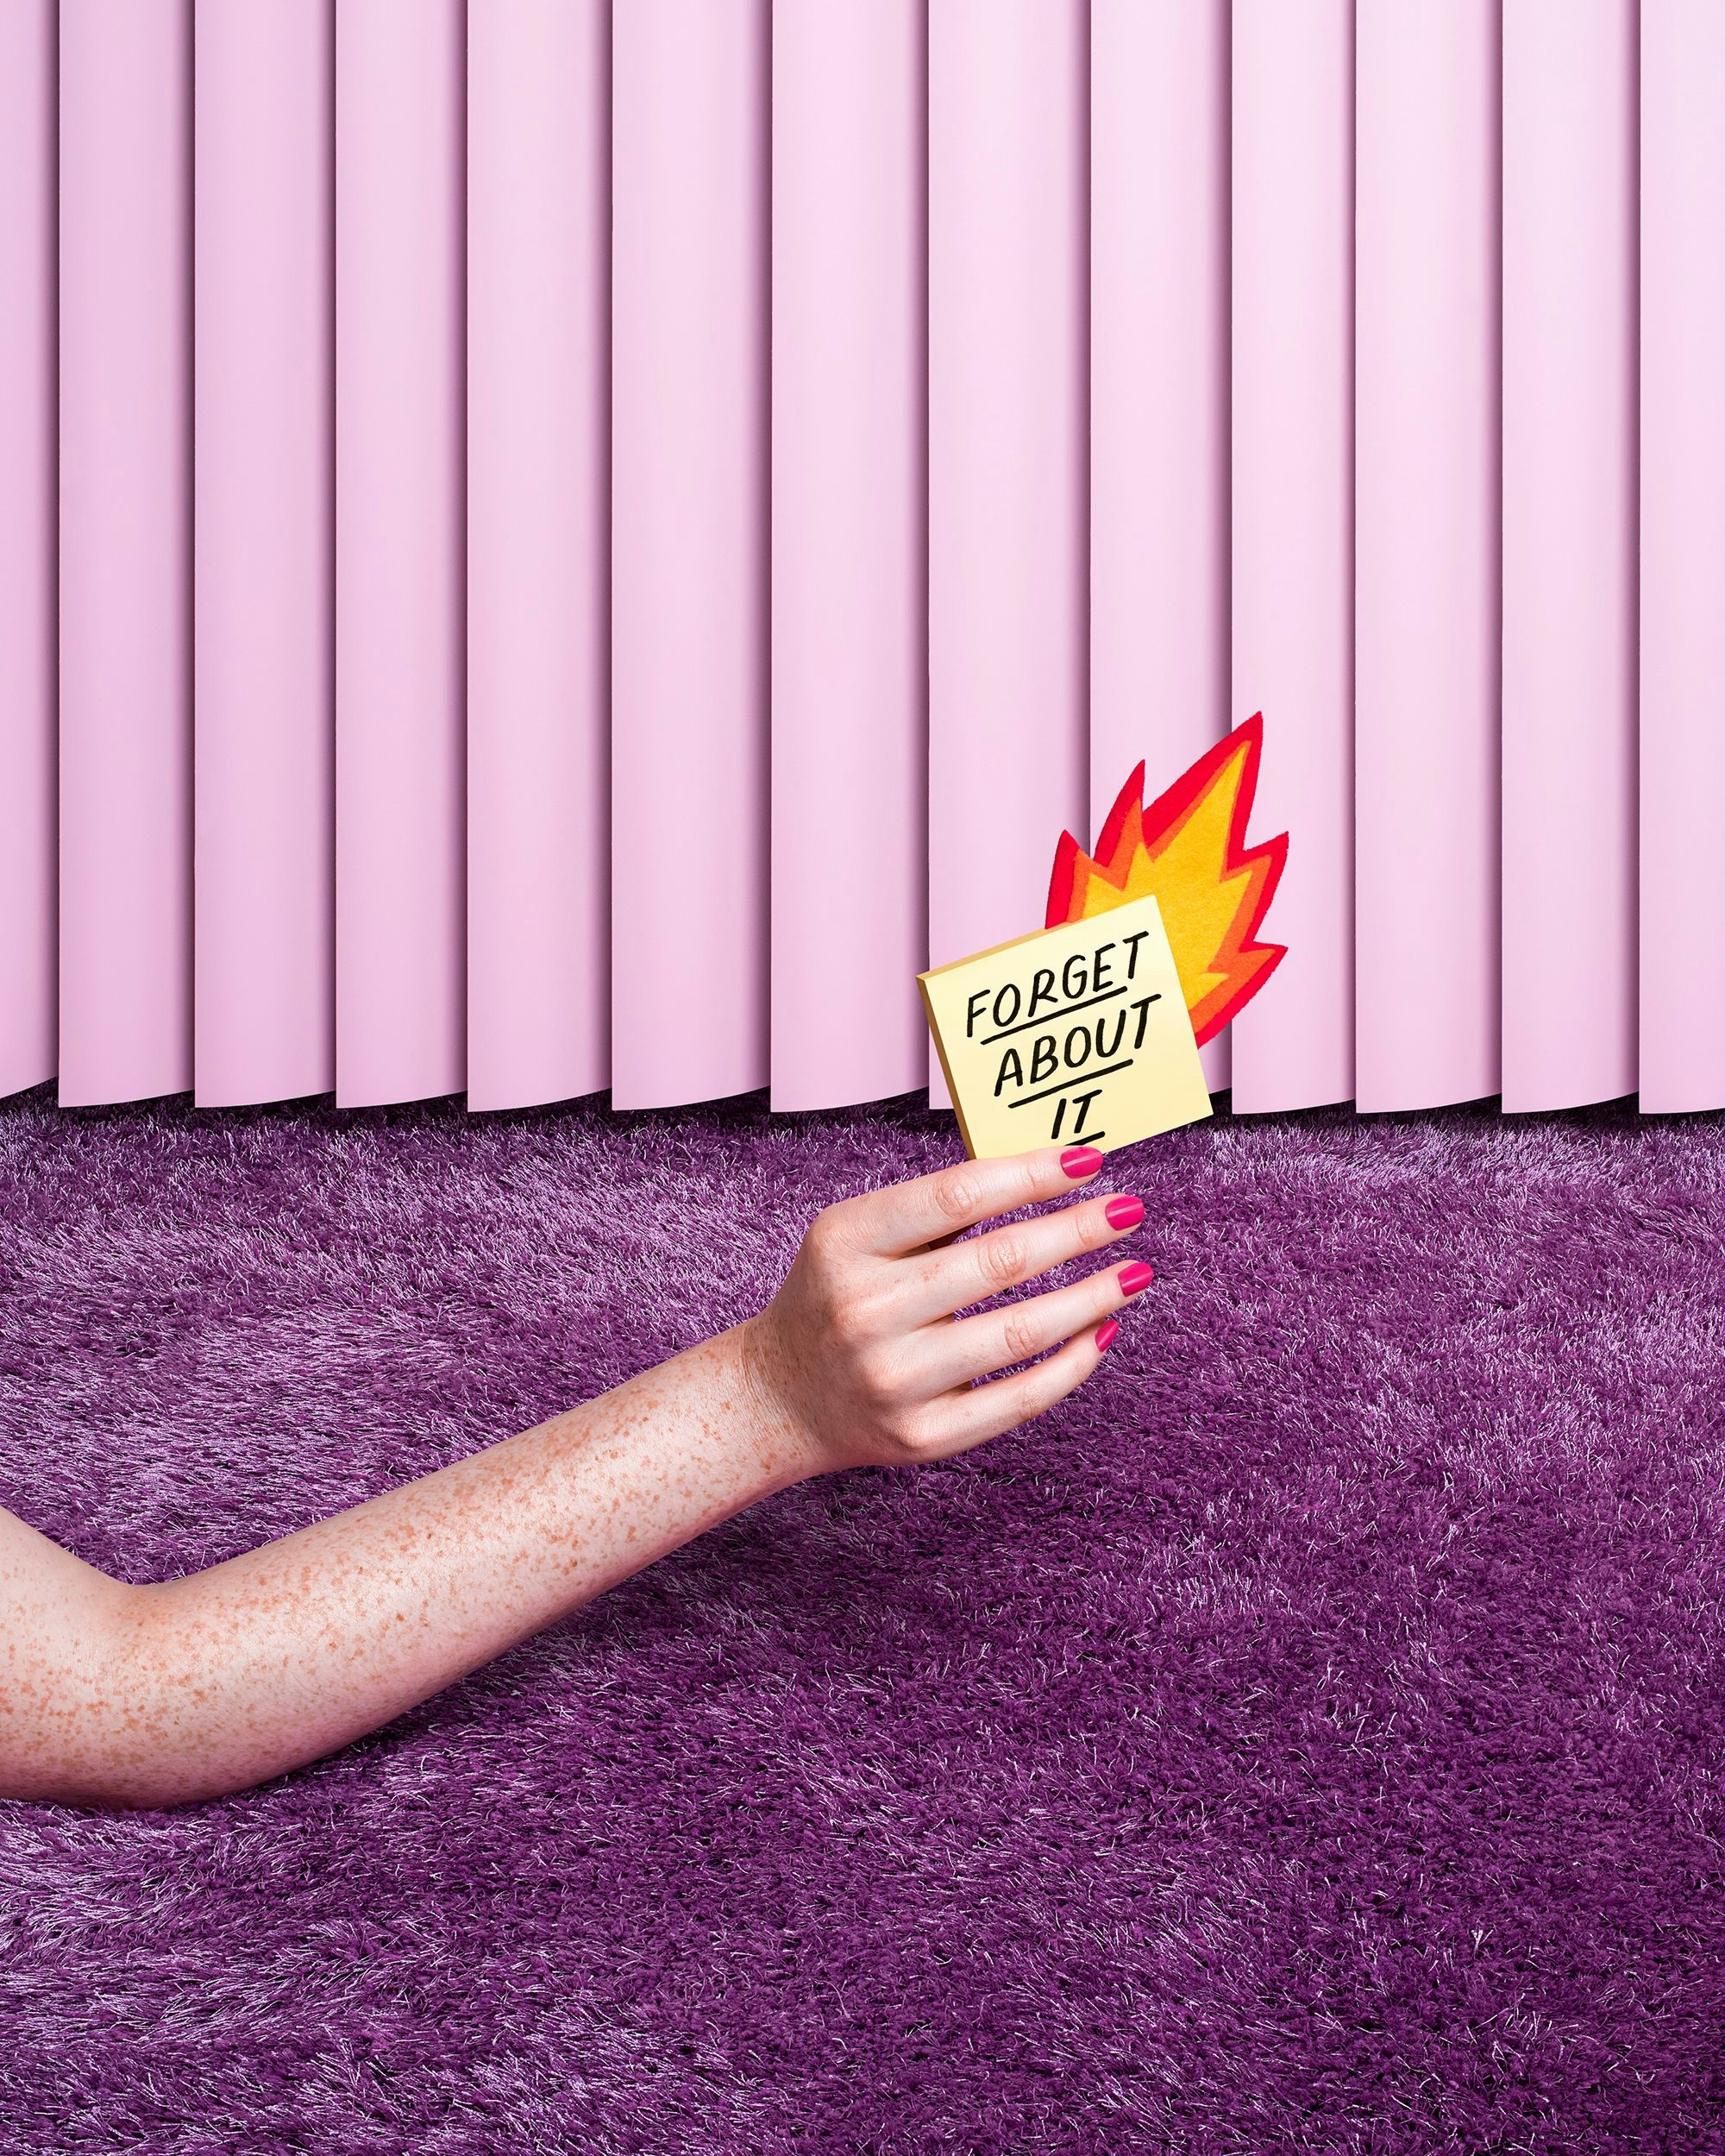 A hand holds up a postcard saying 'FORGET ABOUT IT' against a backdrop of pink curtains and purple carpet.